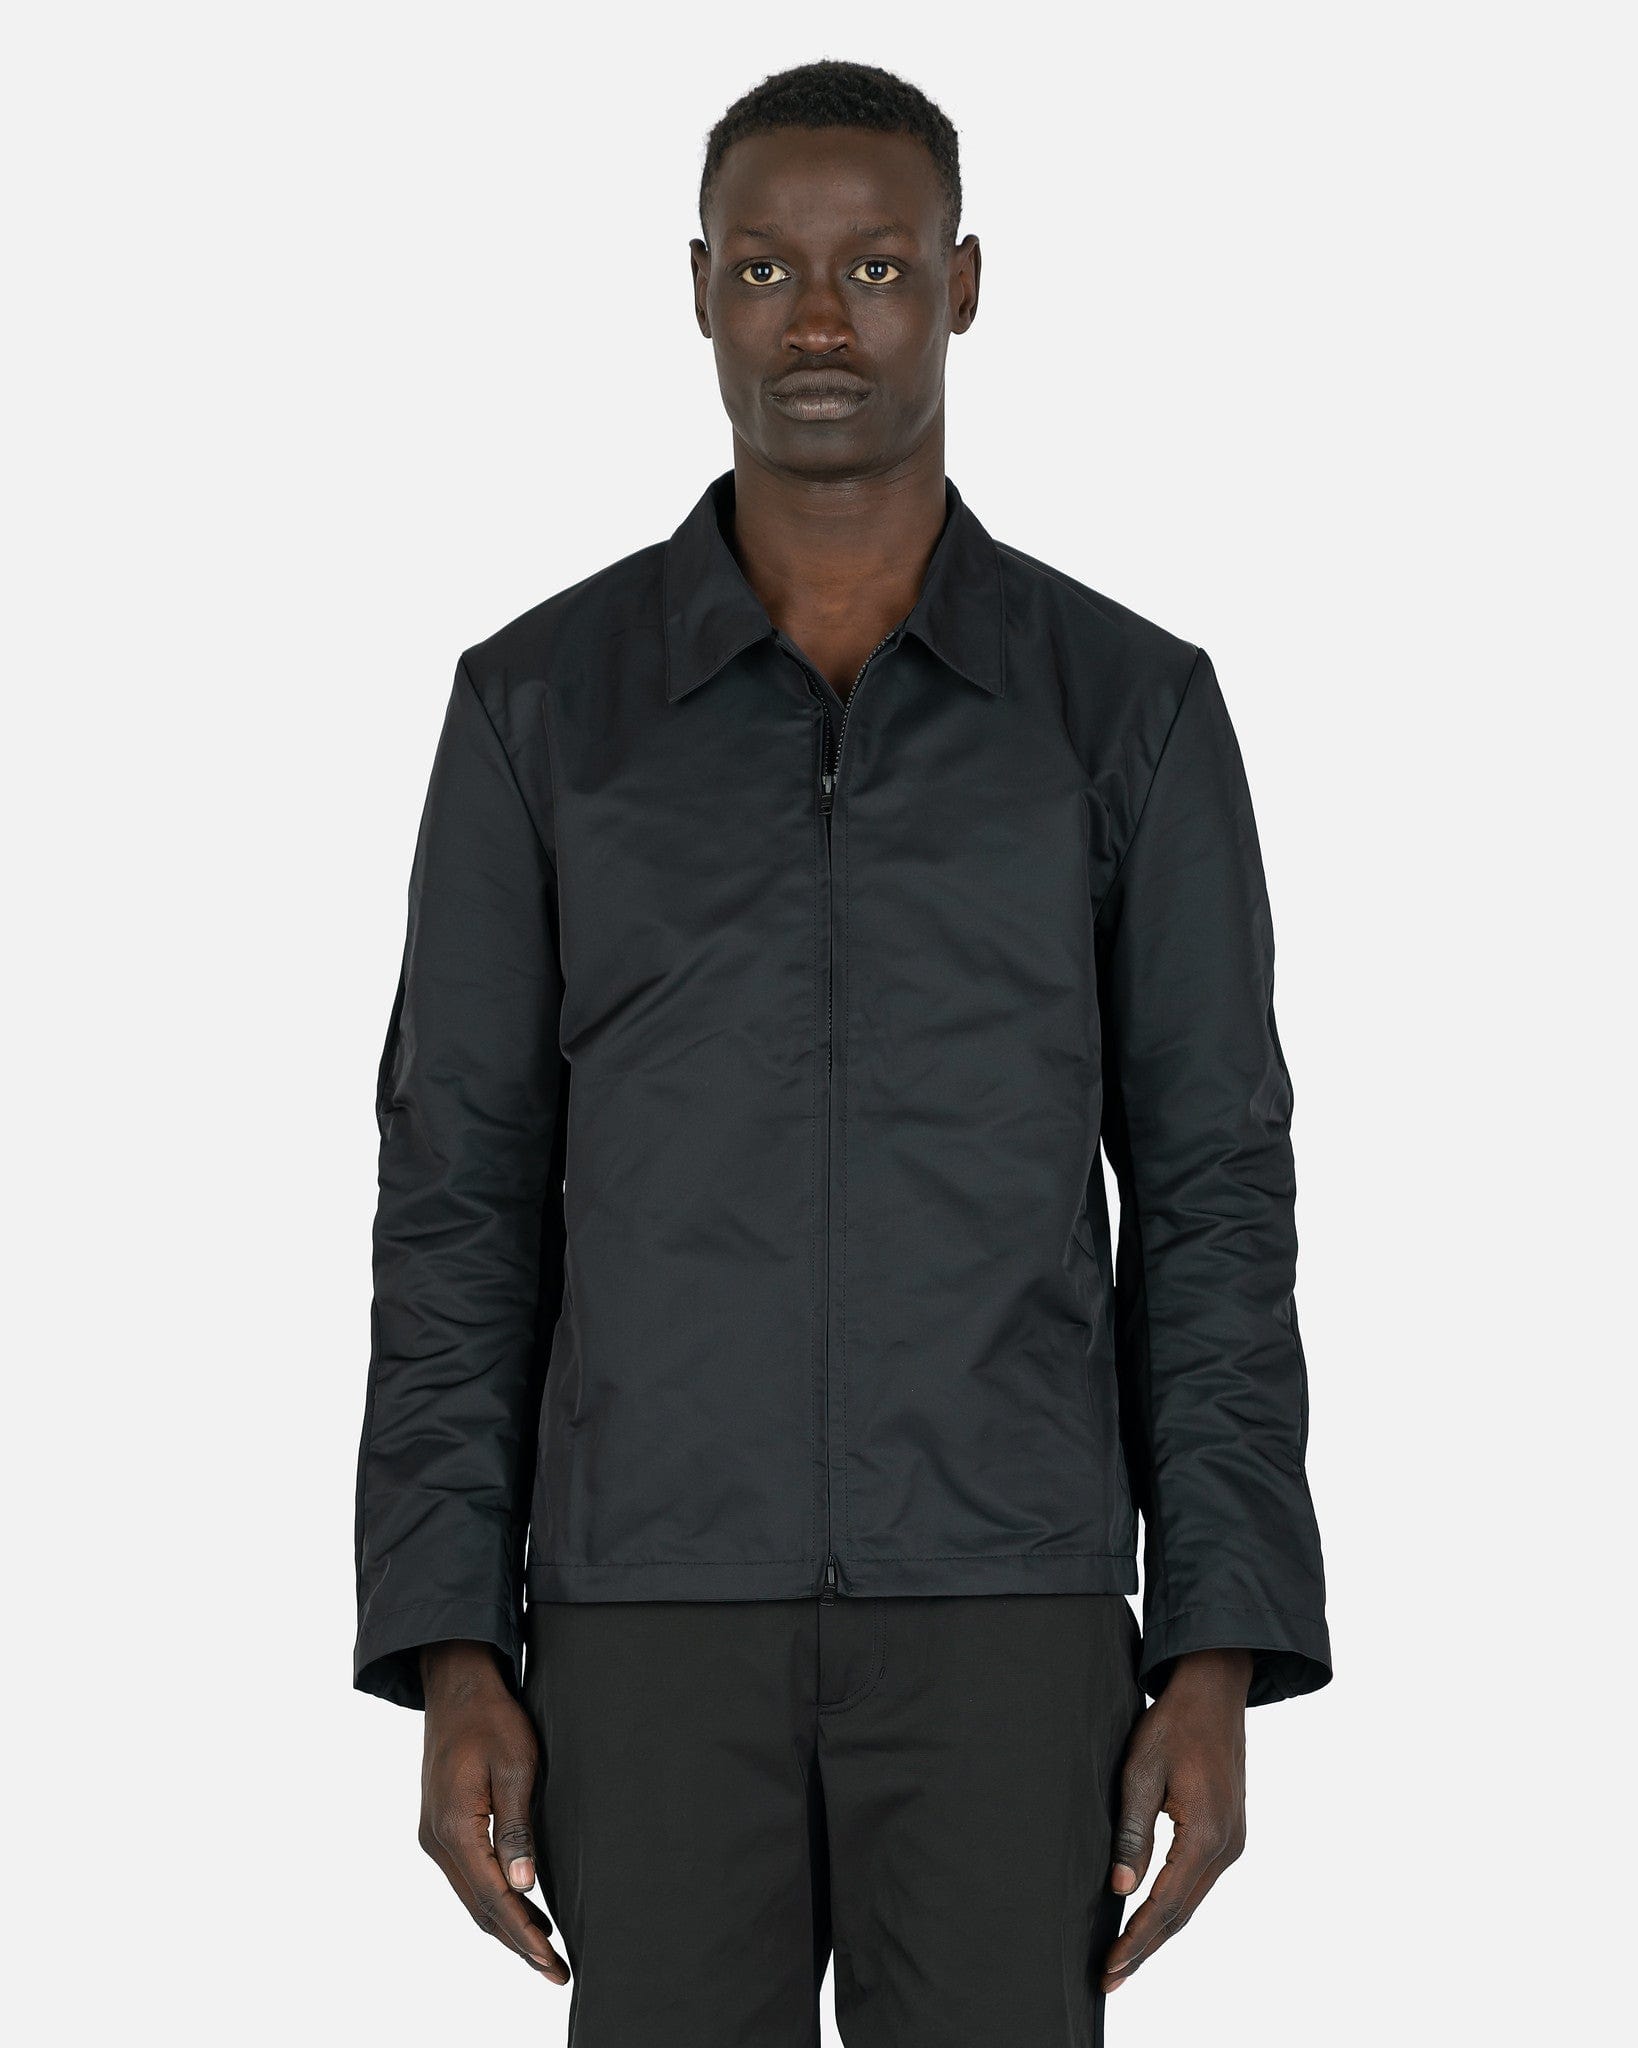 POST ARCHIVE FACTION (P.A.F) Men's Jackets 4.0+ Jacket Right in Black